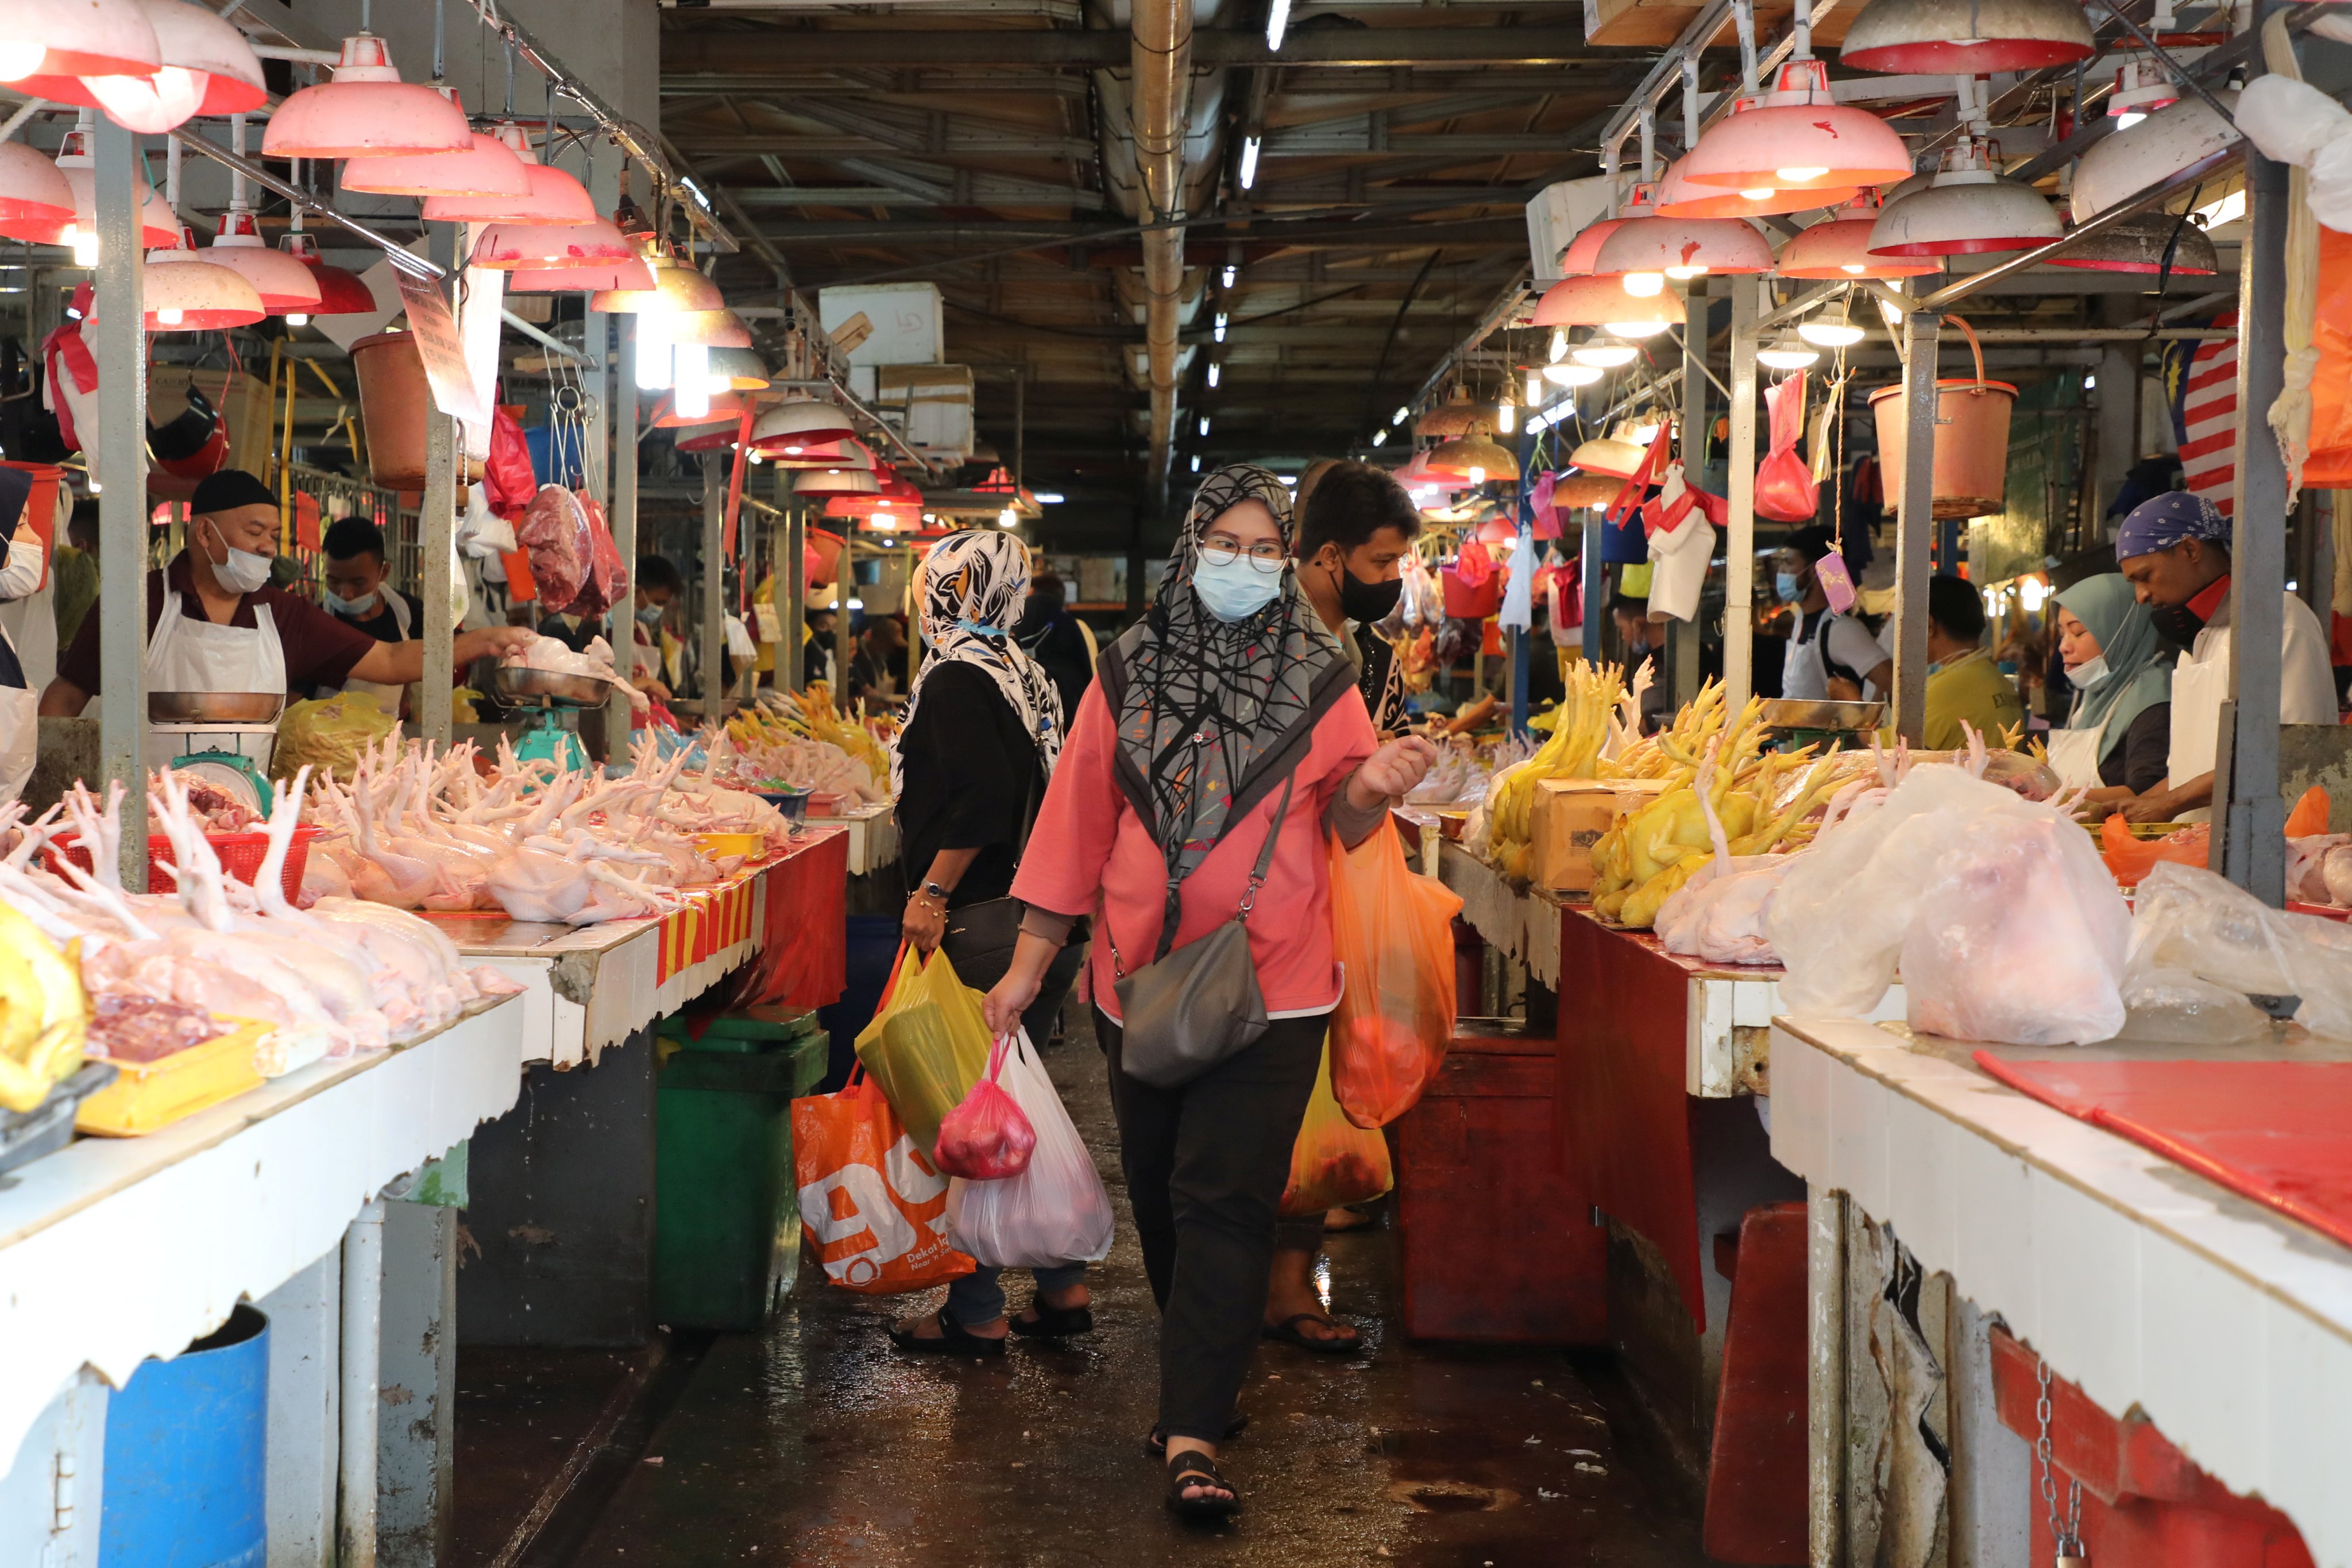 Shoppers wear masks at a market, amid the pandemic in Kuala Lumpur, Malaysia. Photo: Reuters/File